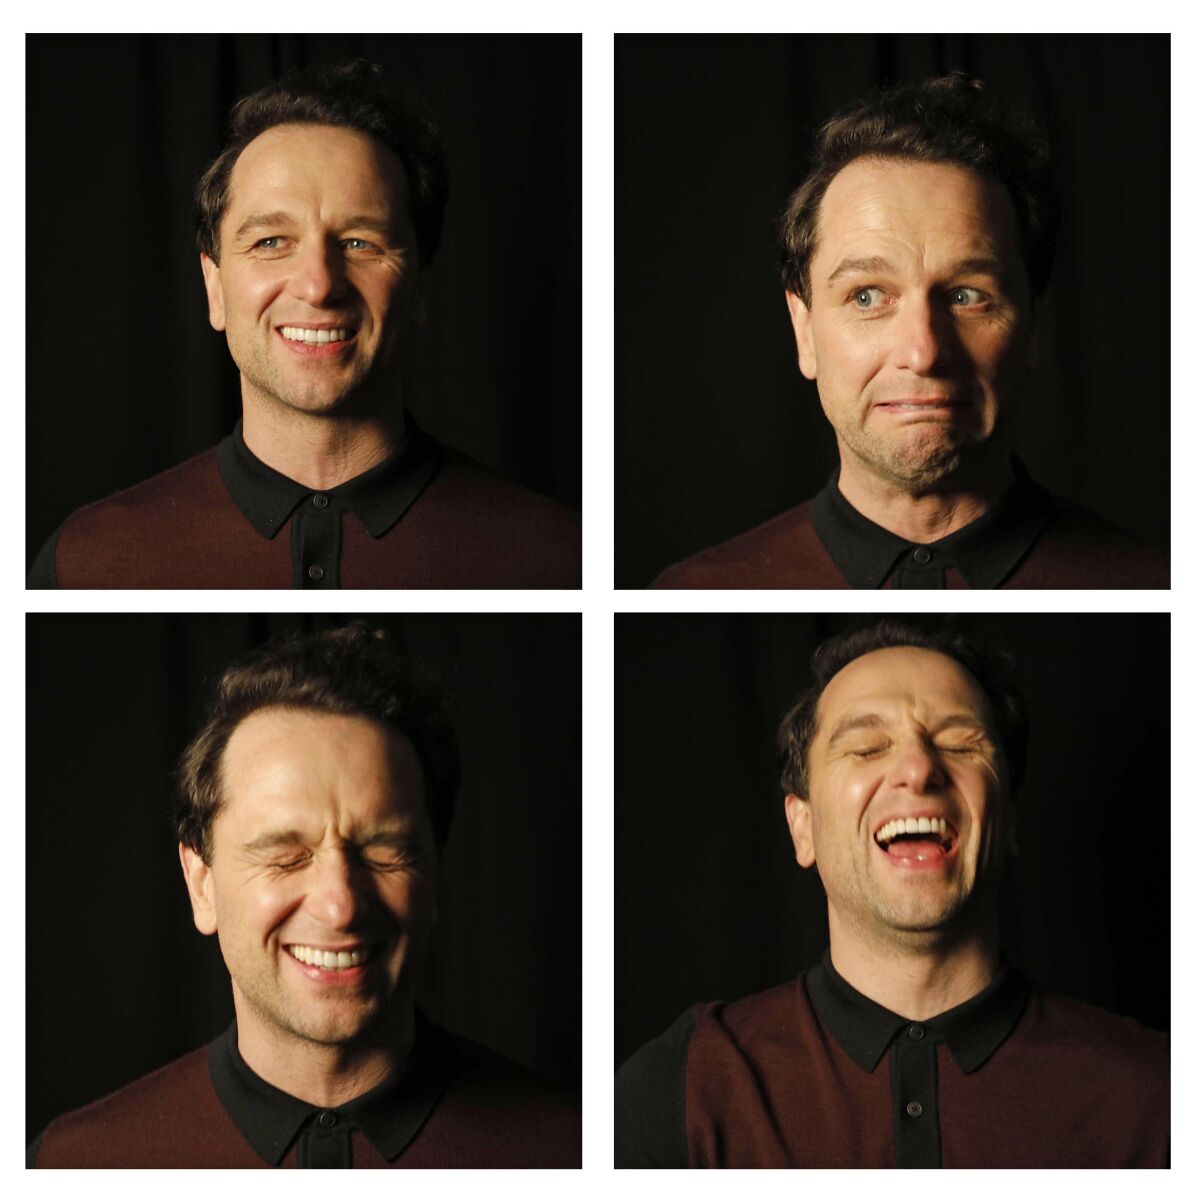 "Beautiful Day in the Neighborhood" actor Matthew Rhys has fun with his facial expressions during a photo shoot.